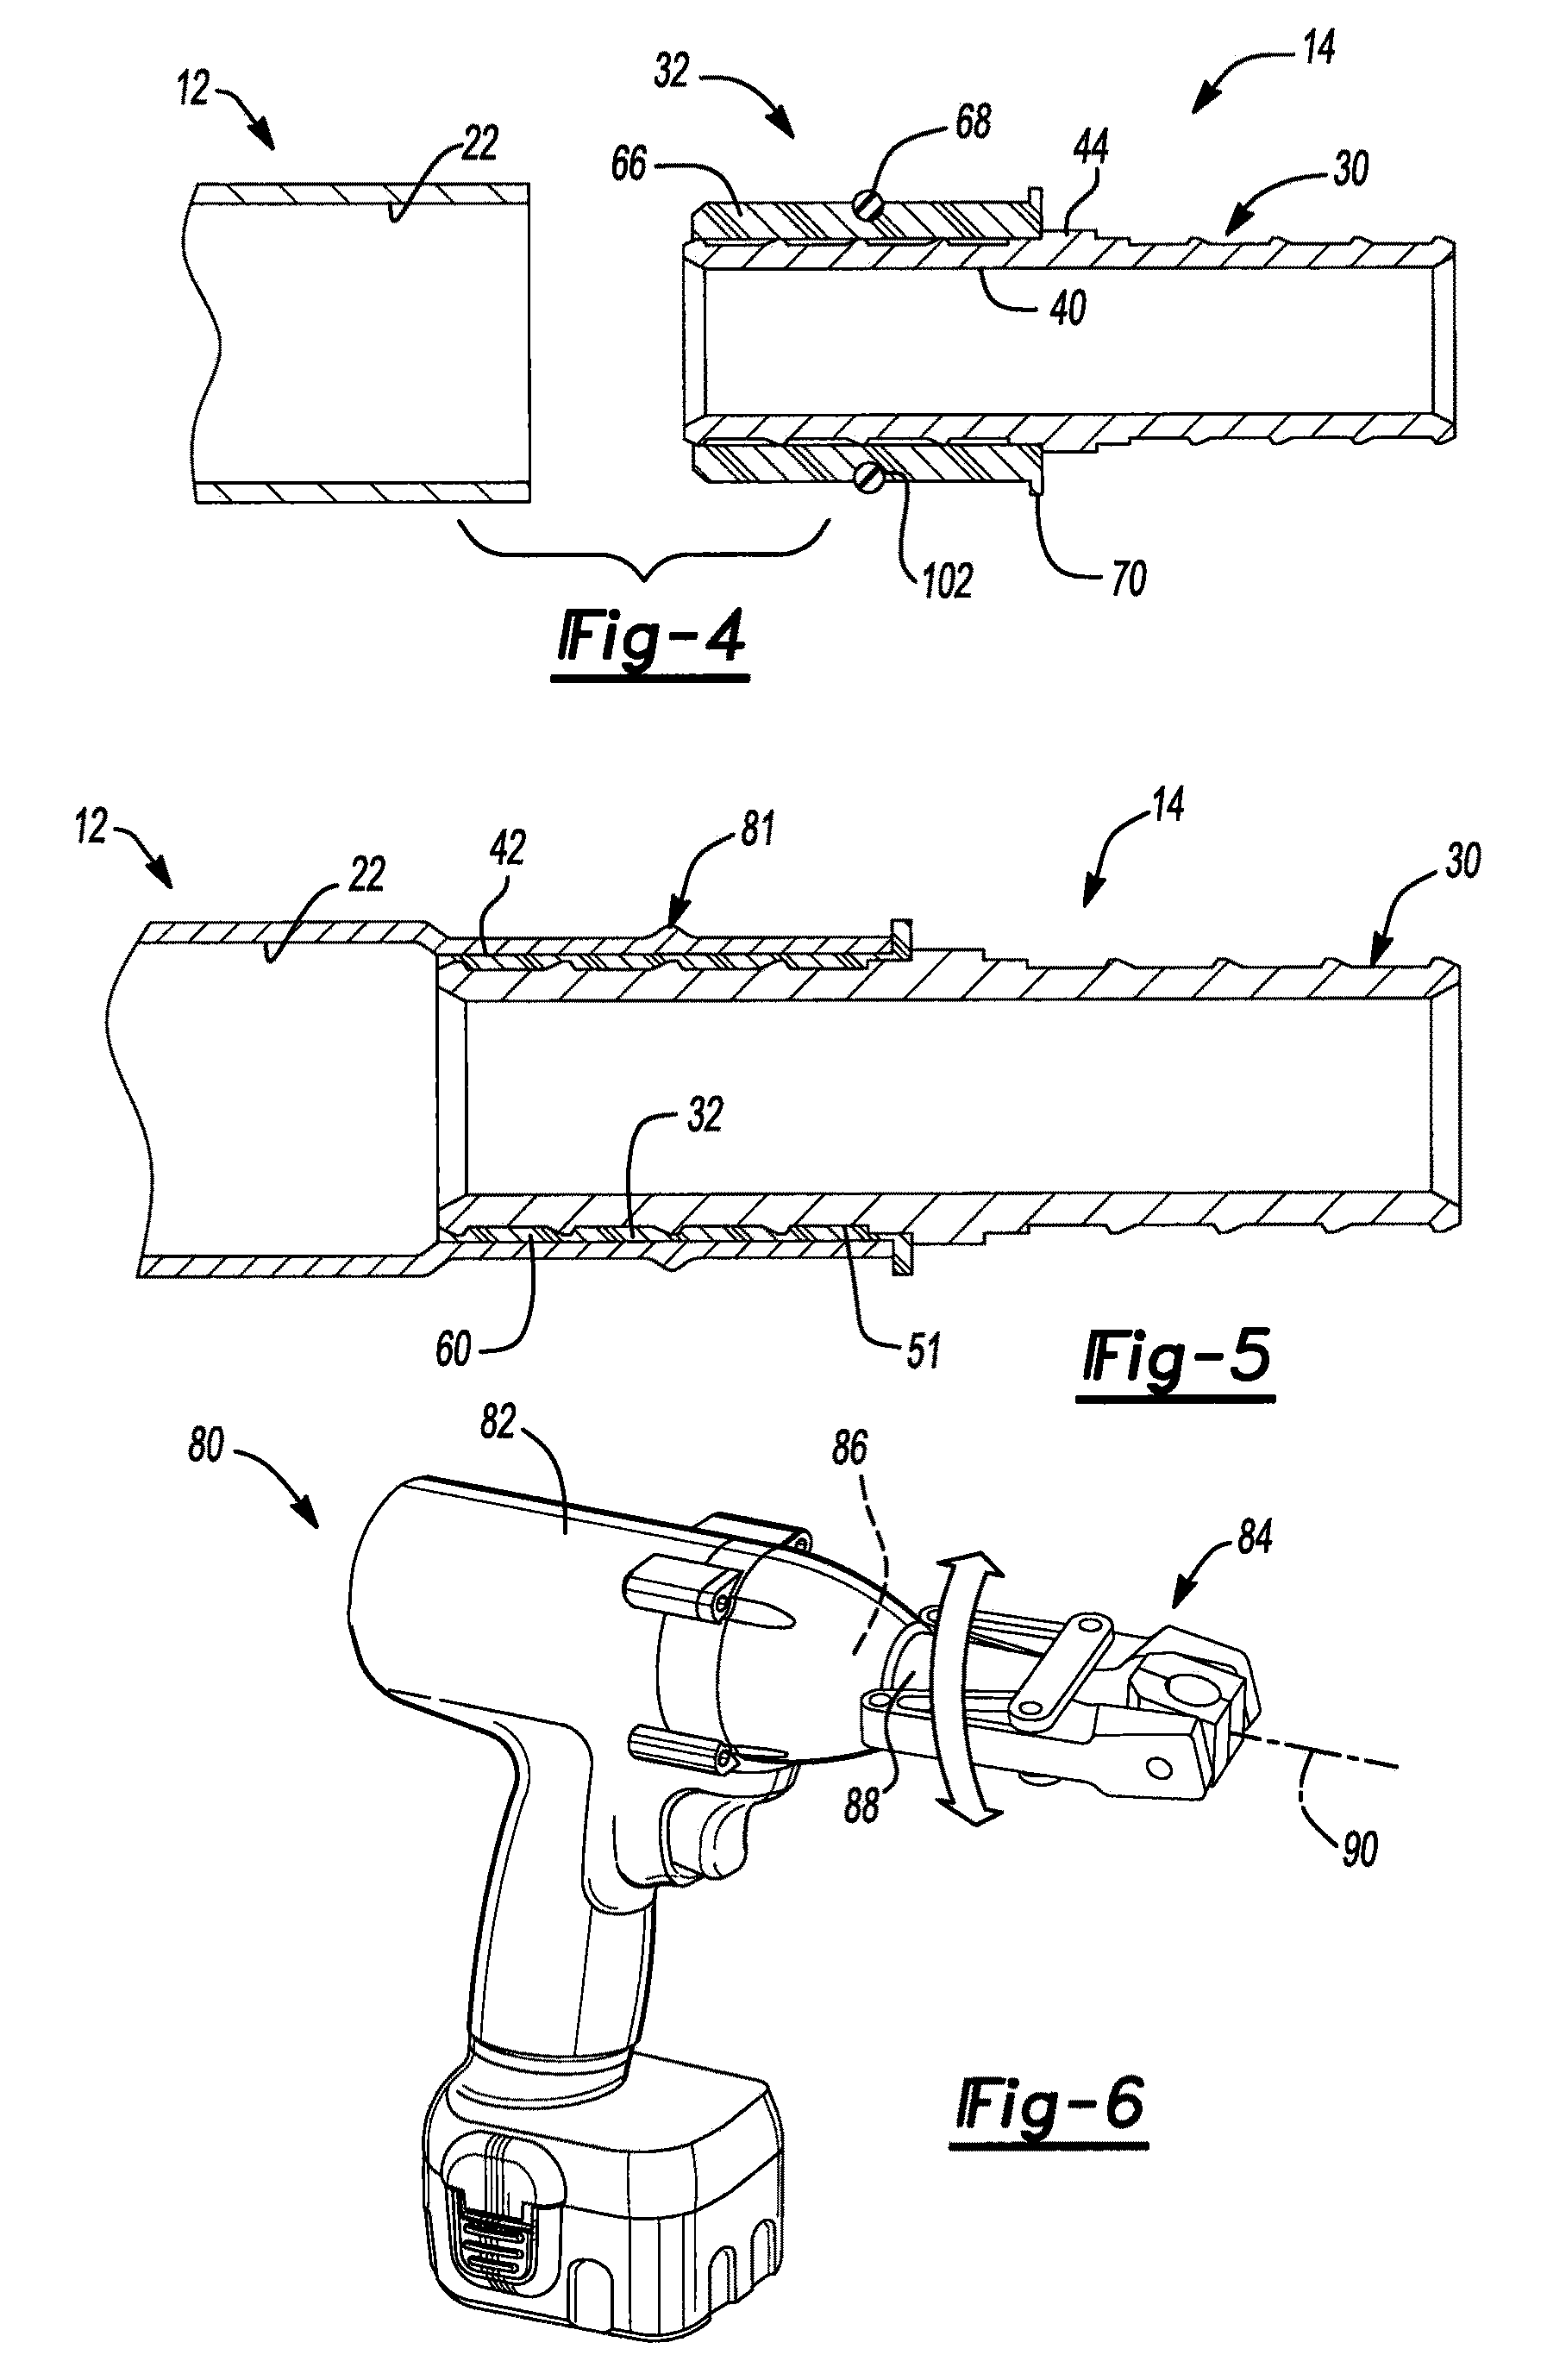 Fluid conduit system and fittings therefor